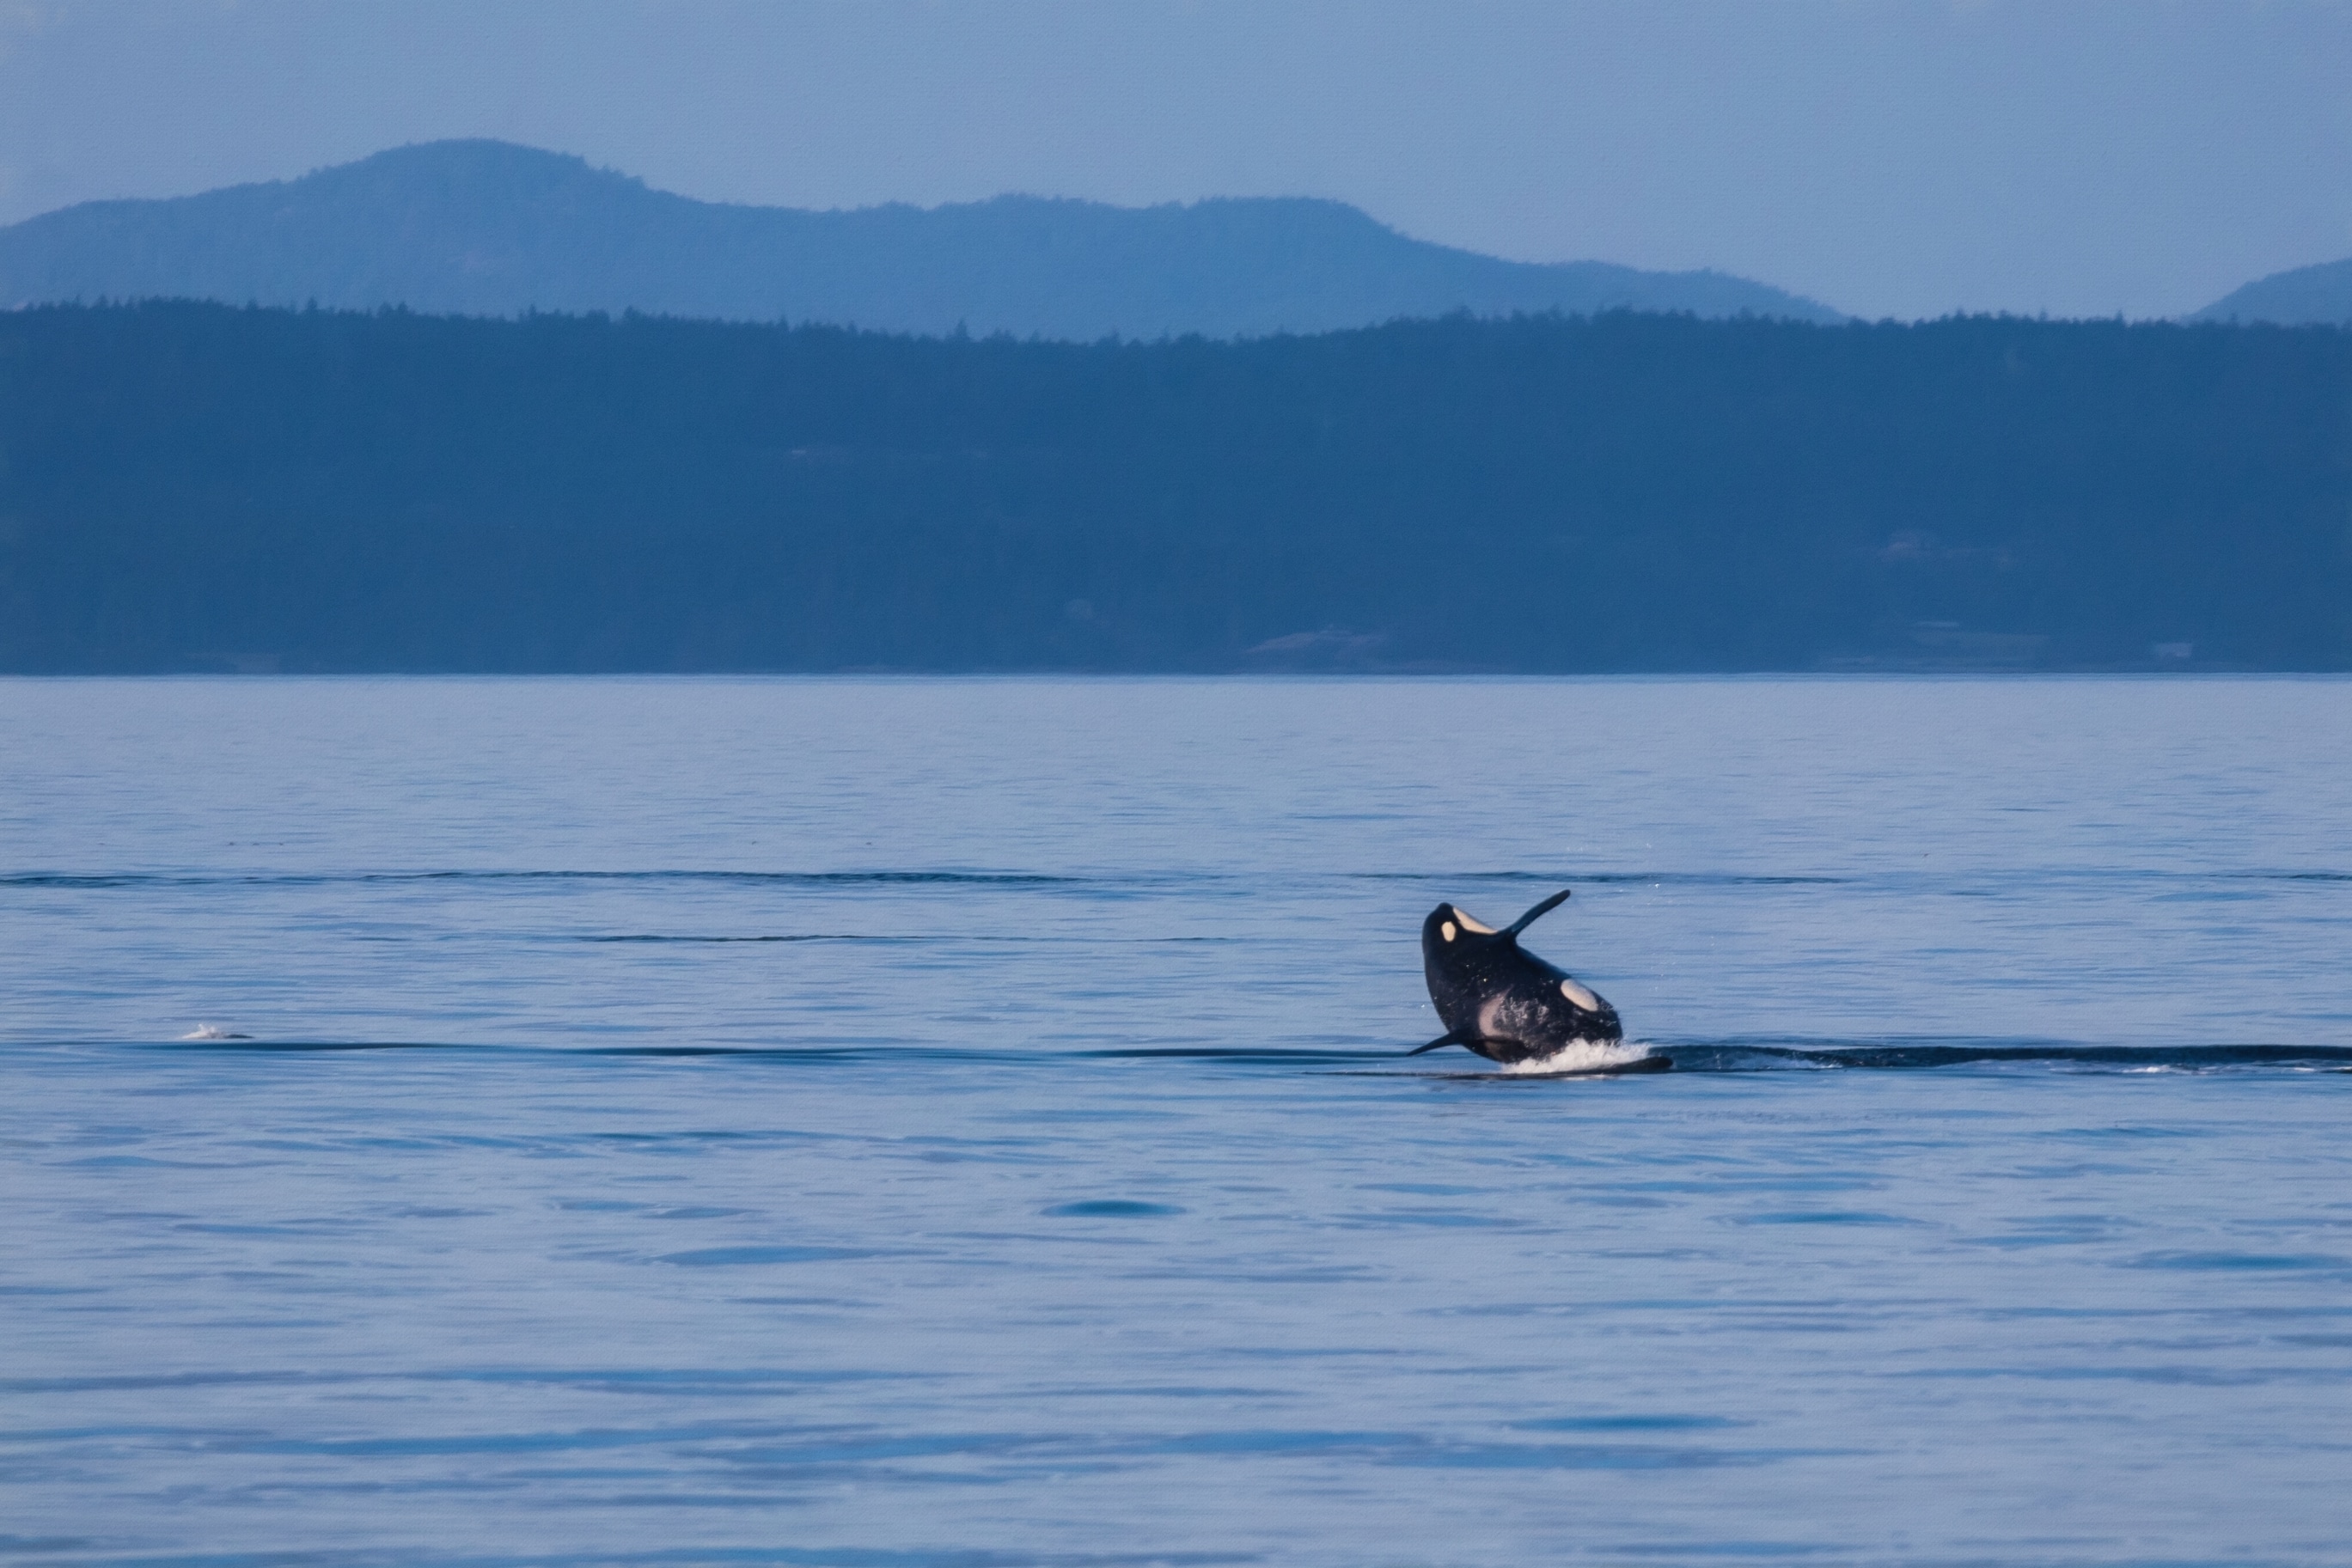 A breaching orca near the waters of Vancouver Island